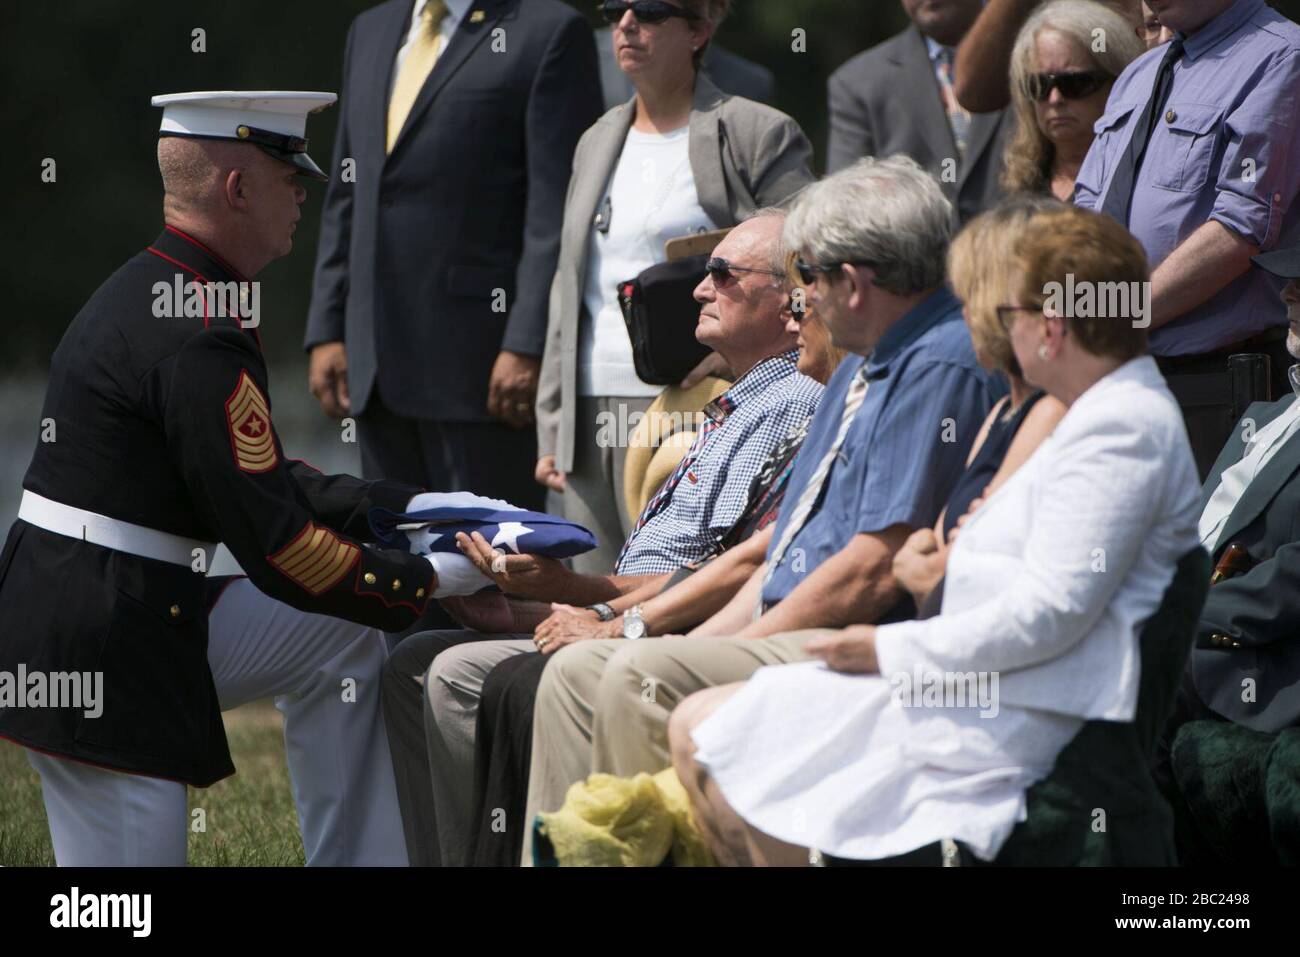 Graveside service for U.S. Marine Corps Pfc. Anthony Brozyna in Section 60 of Arlington National Cemetery (29258996432). Stock Photo